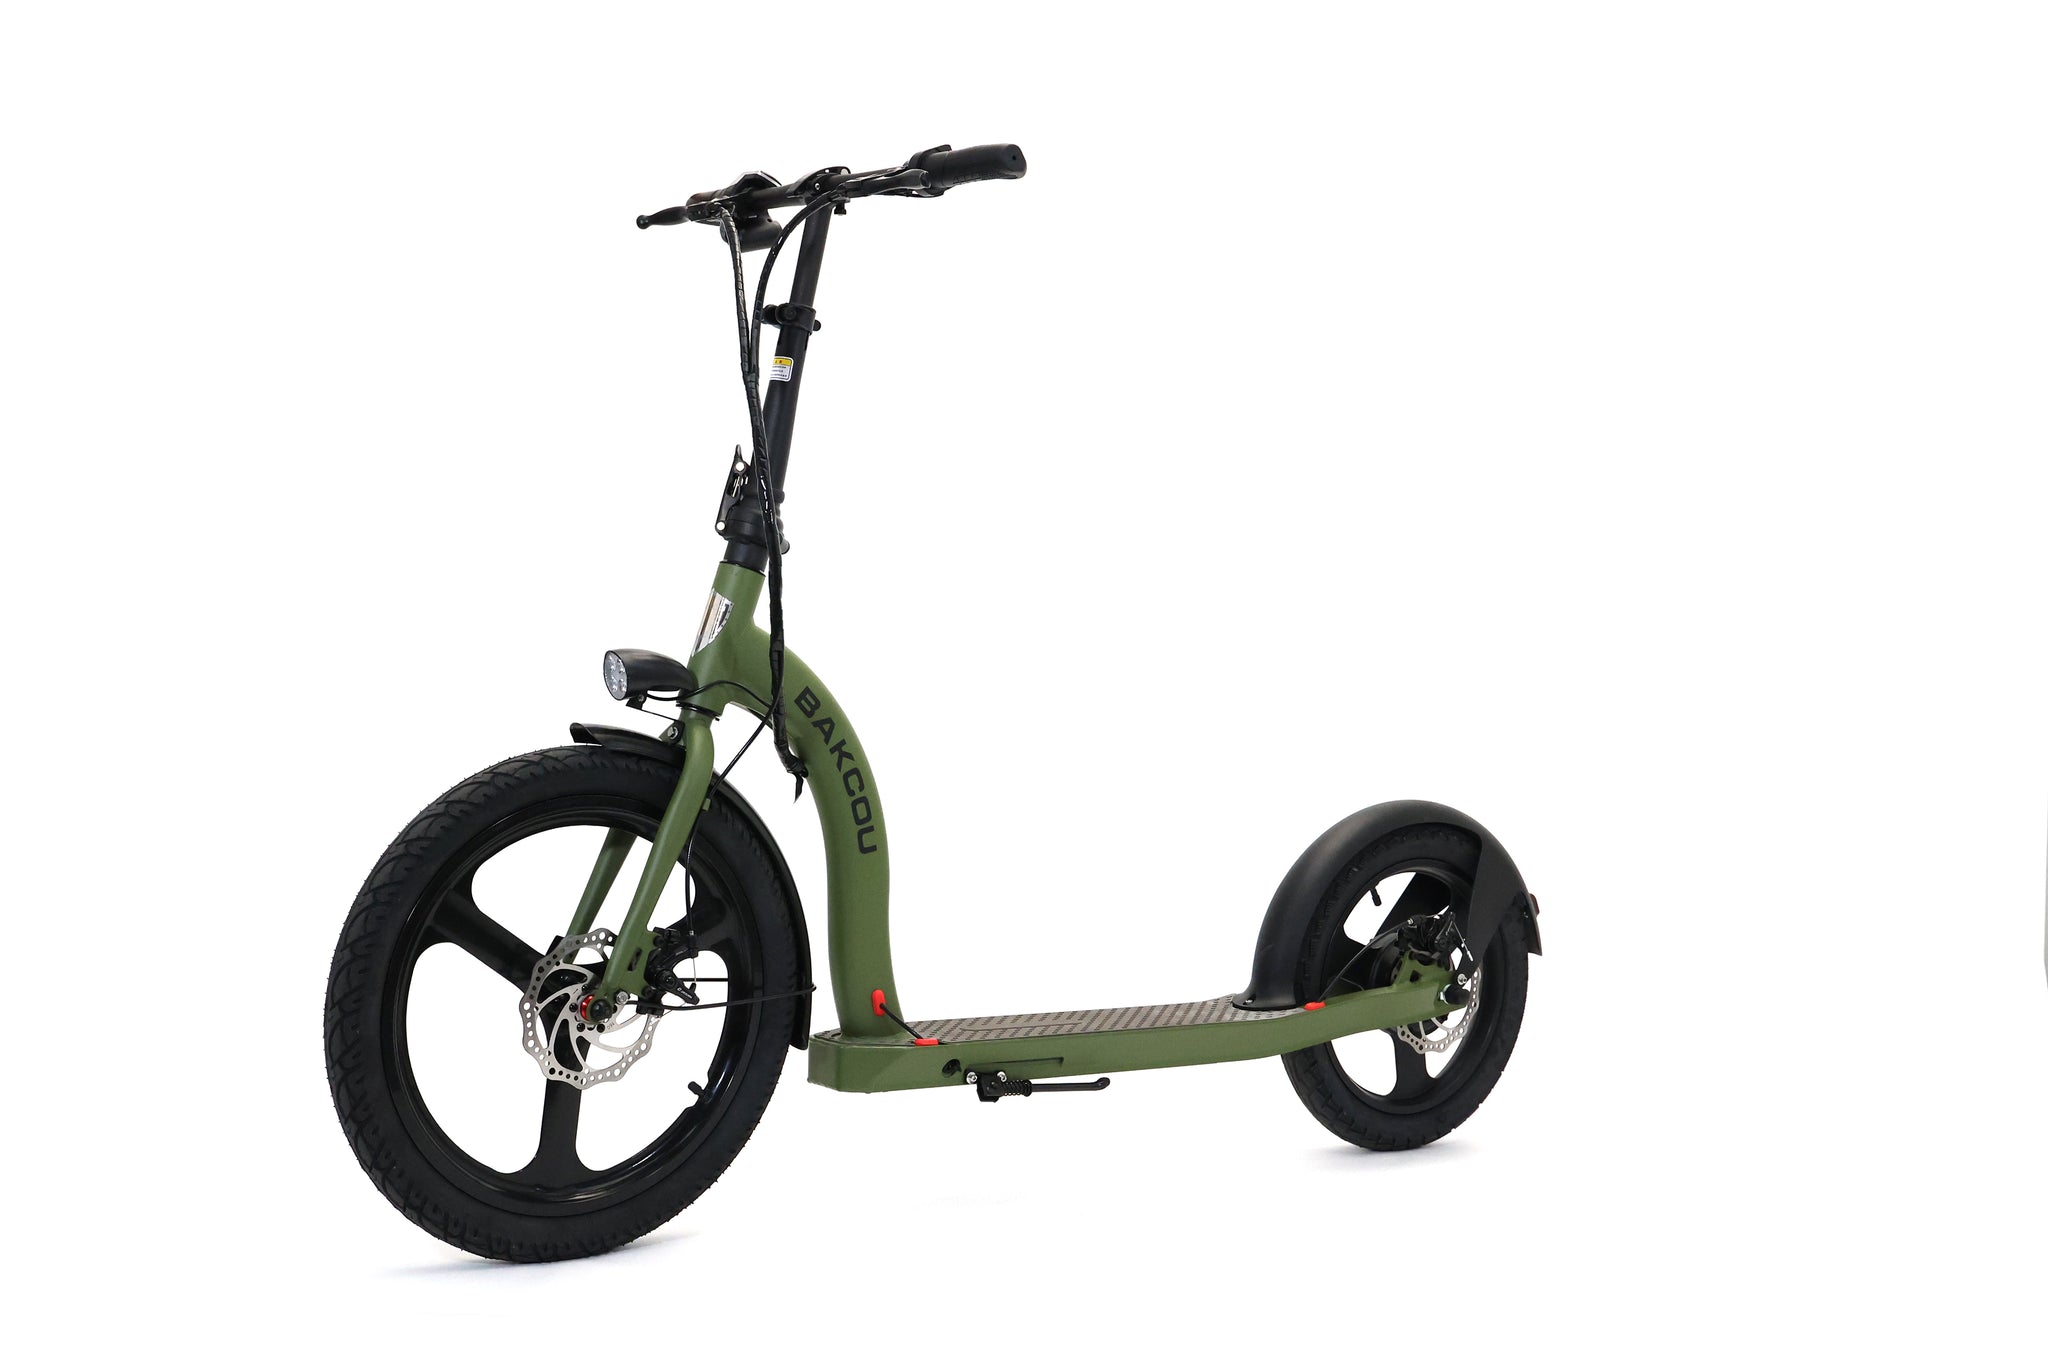 Badger Electric Scooter